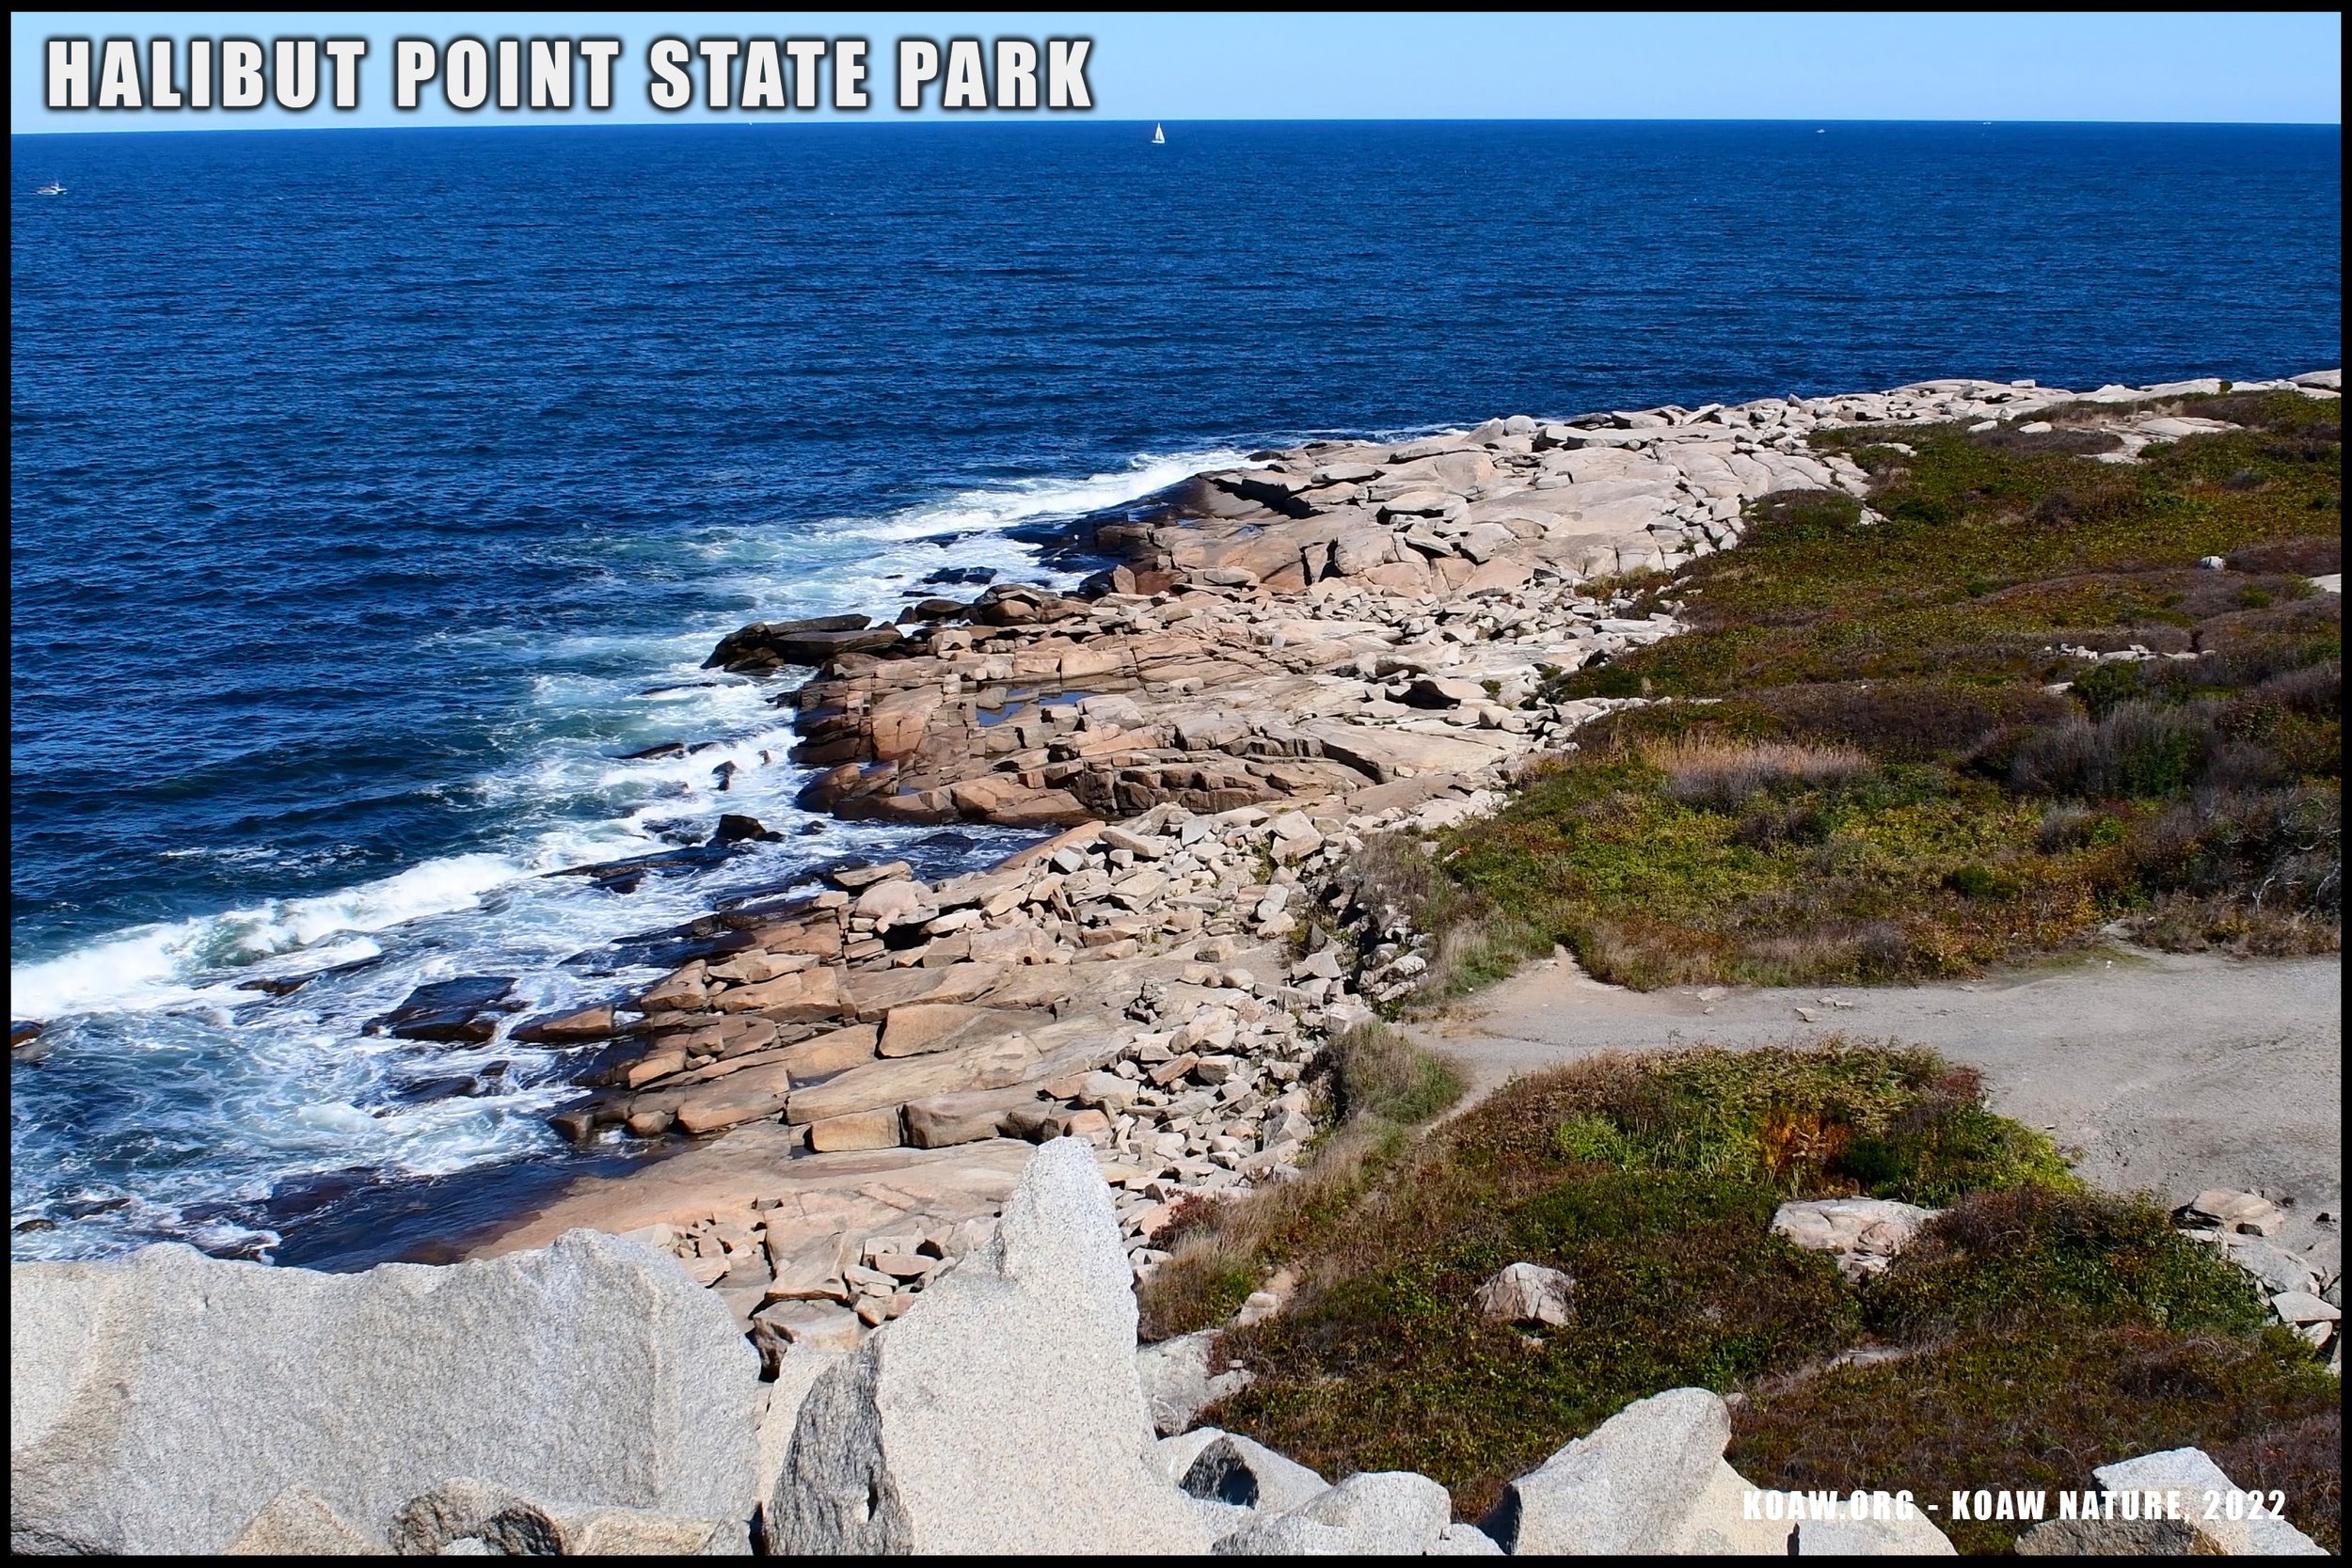 Ocean View Point at Halibut Point State Park